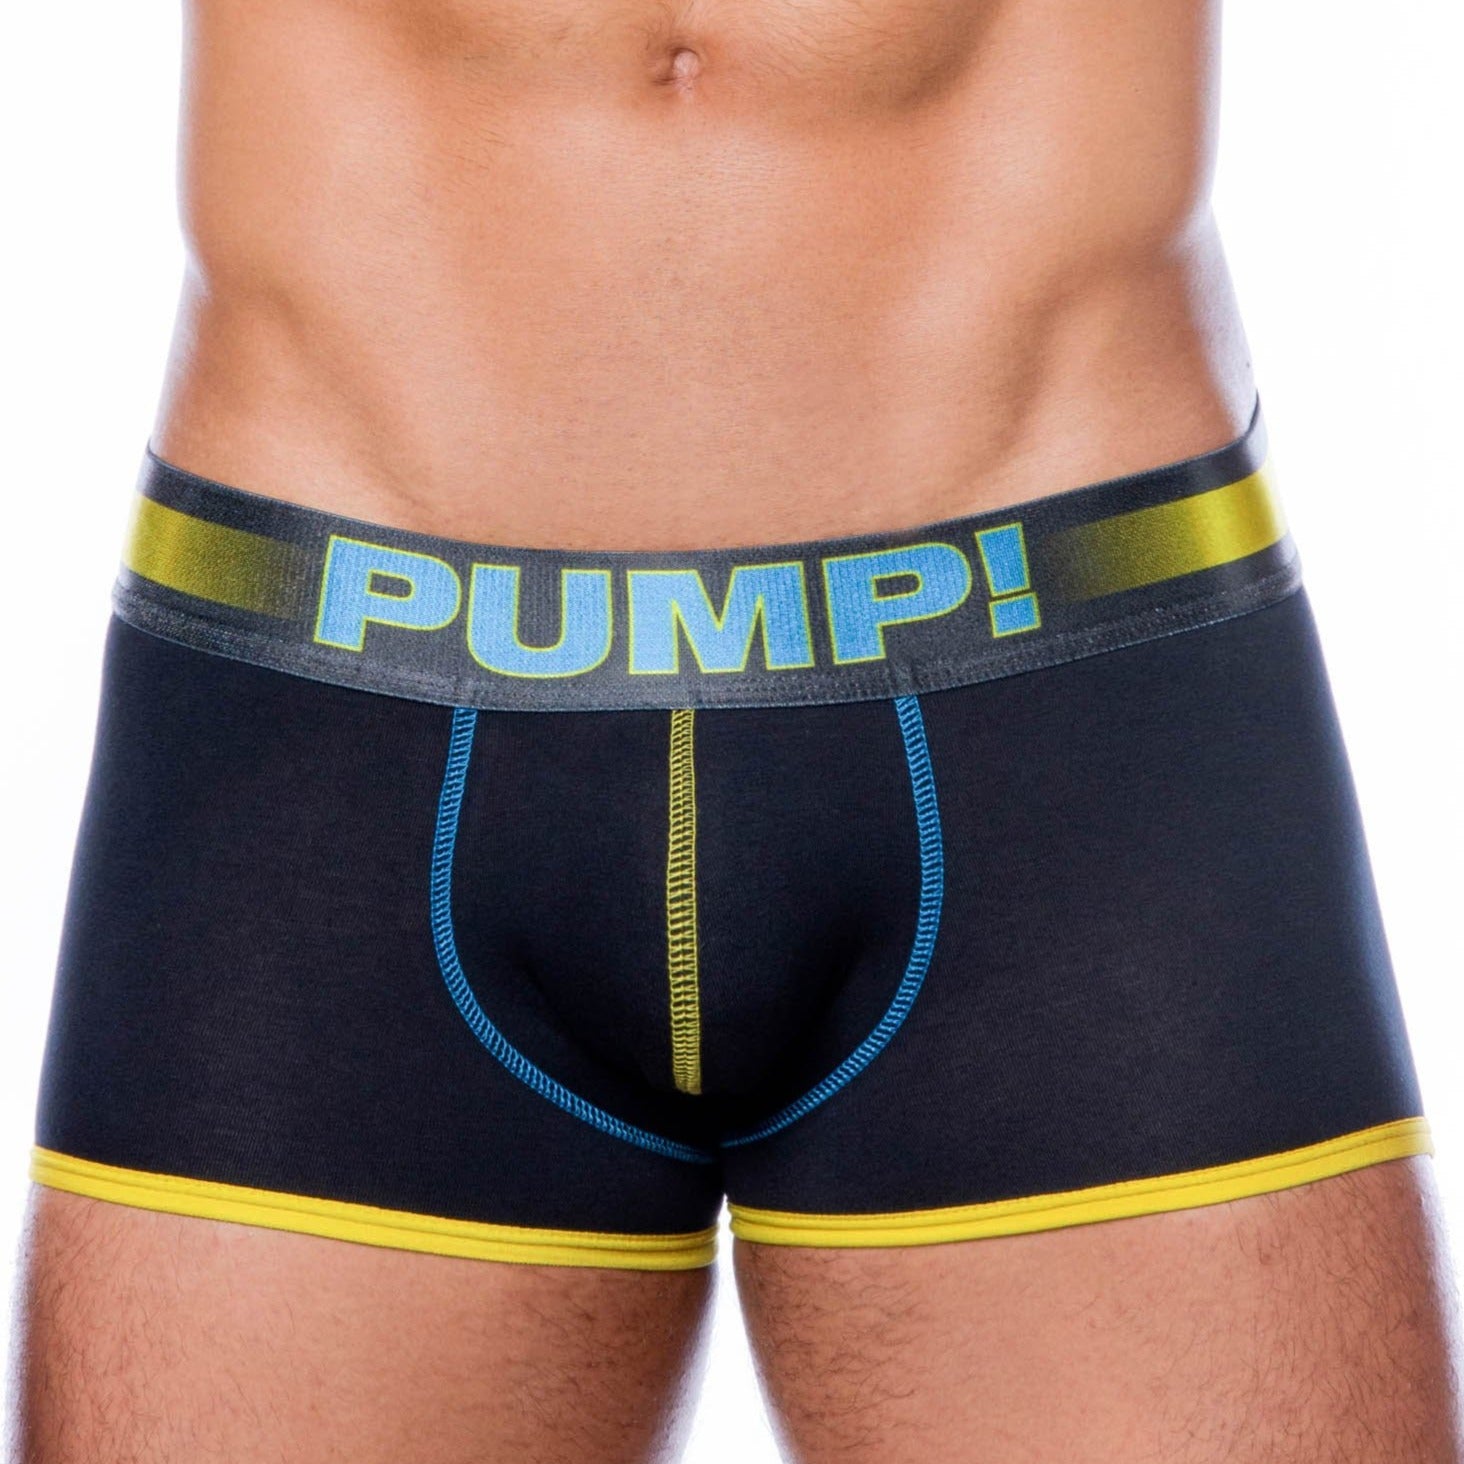 Play Boxer - Yellow Front by PUMP! Underwear at Trenderwear.com